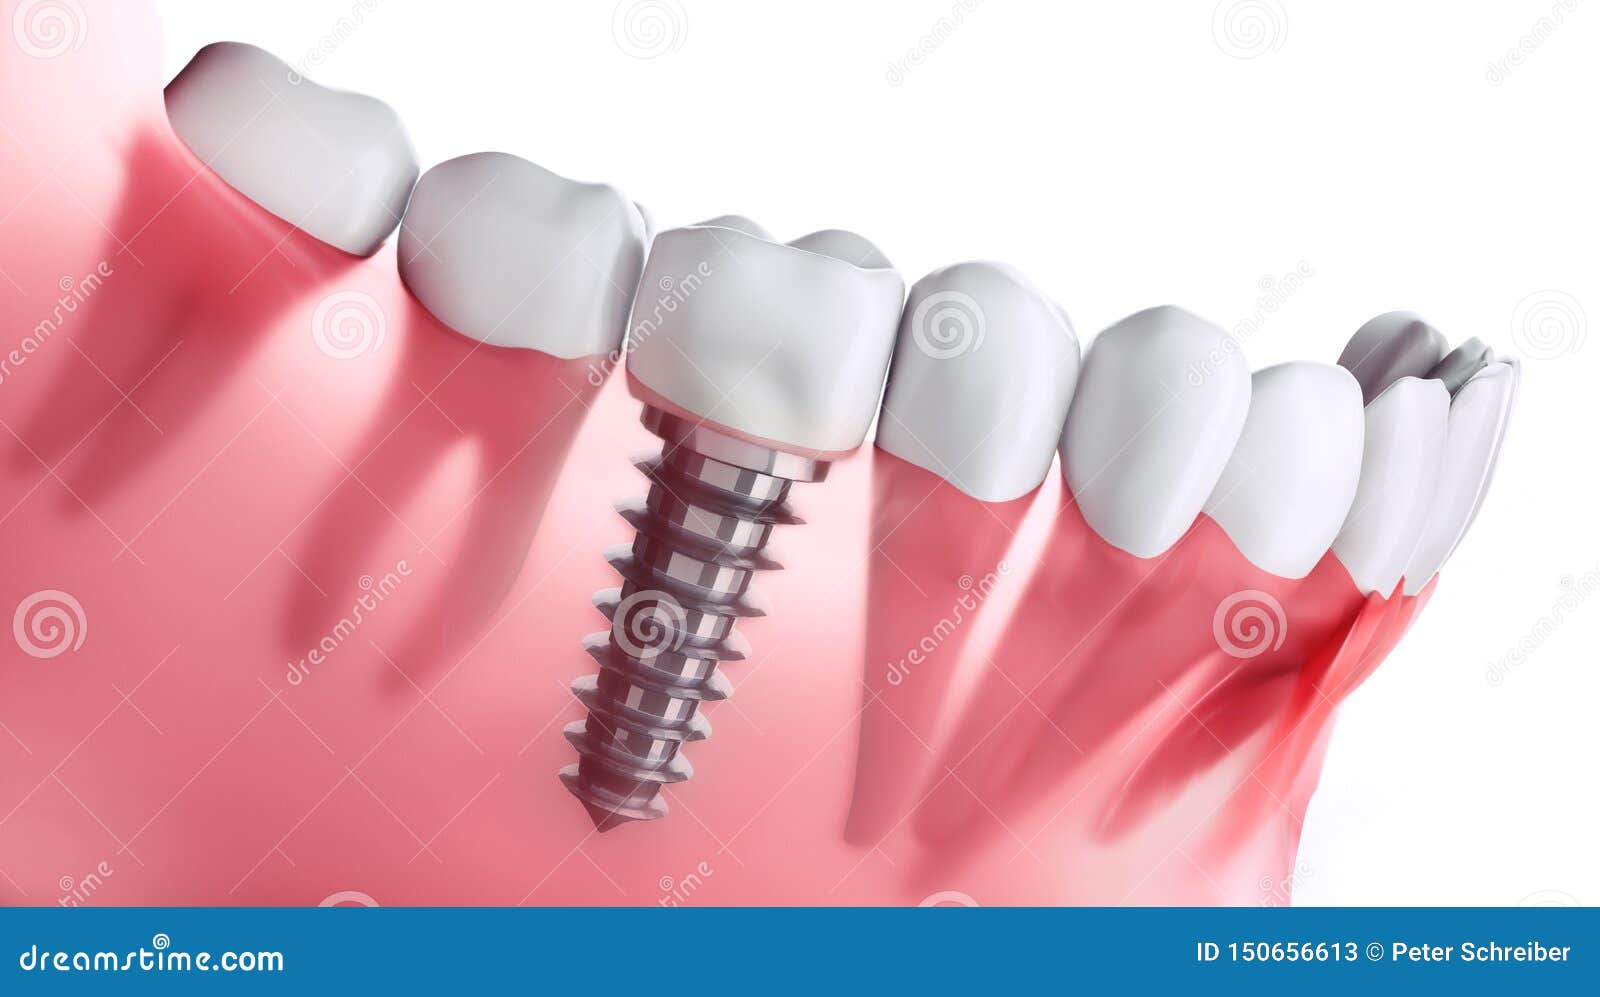 closeup of dental implant in jaw